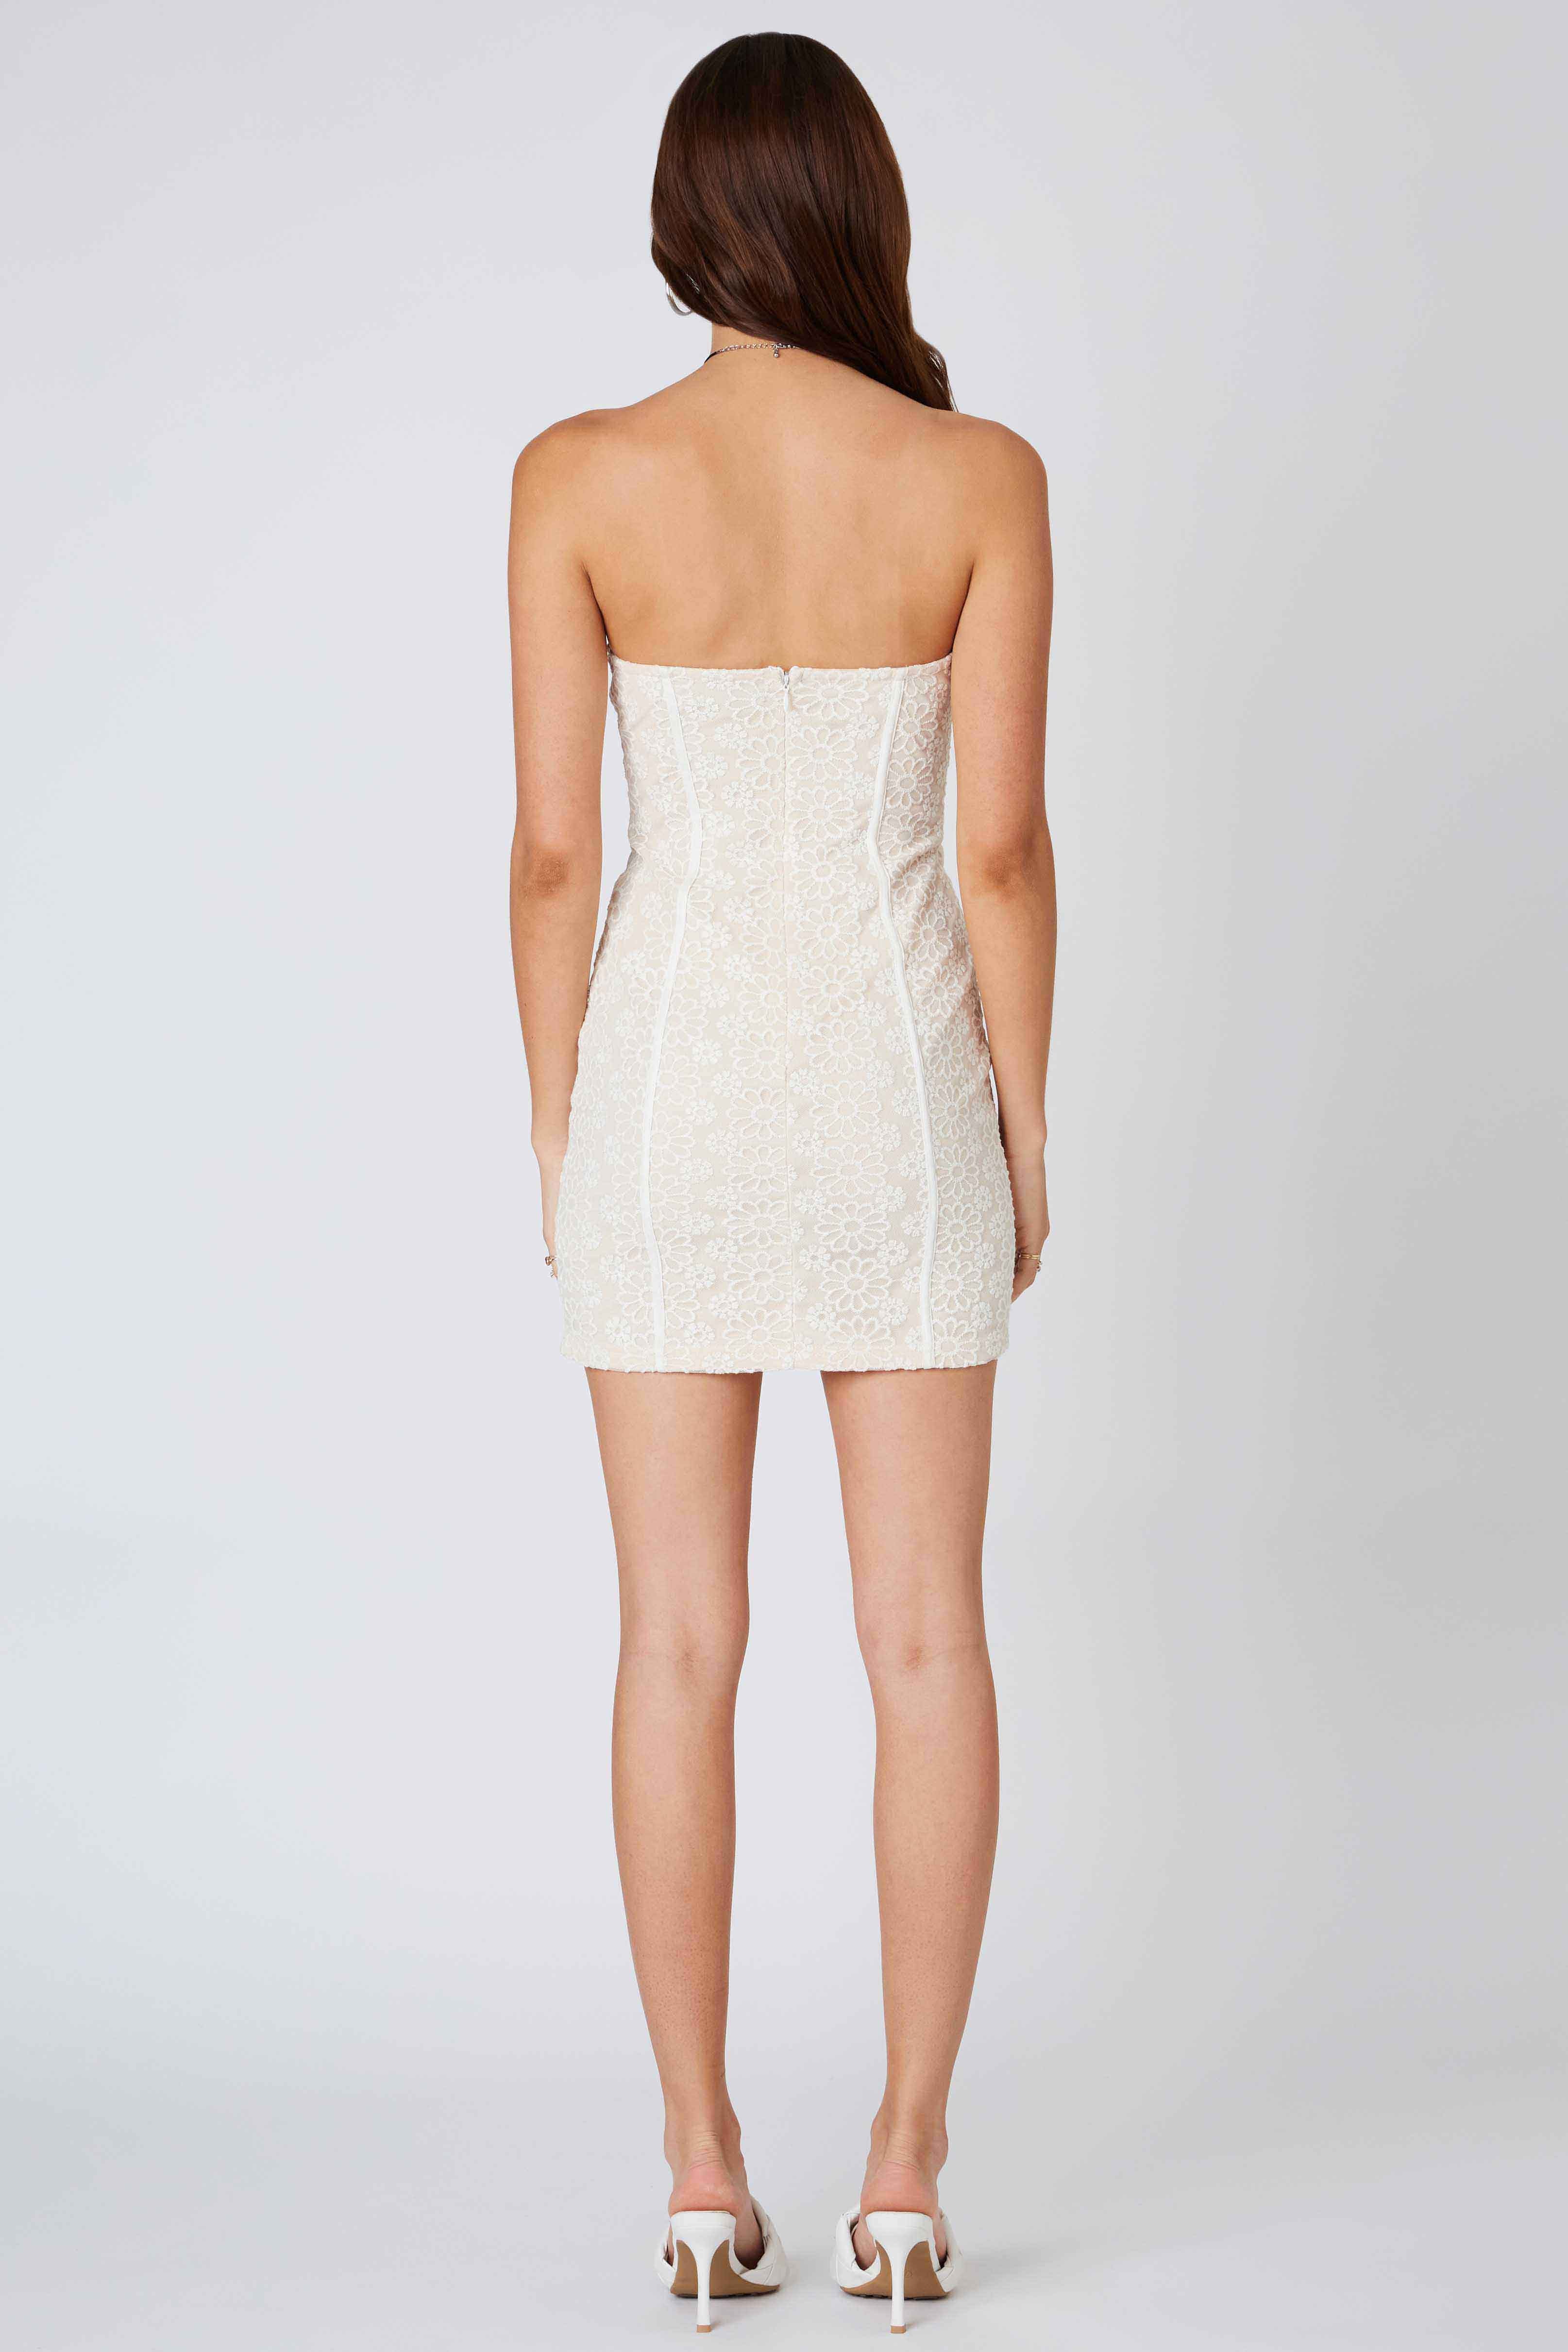 Lace Strapless Dress in White Back View